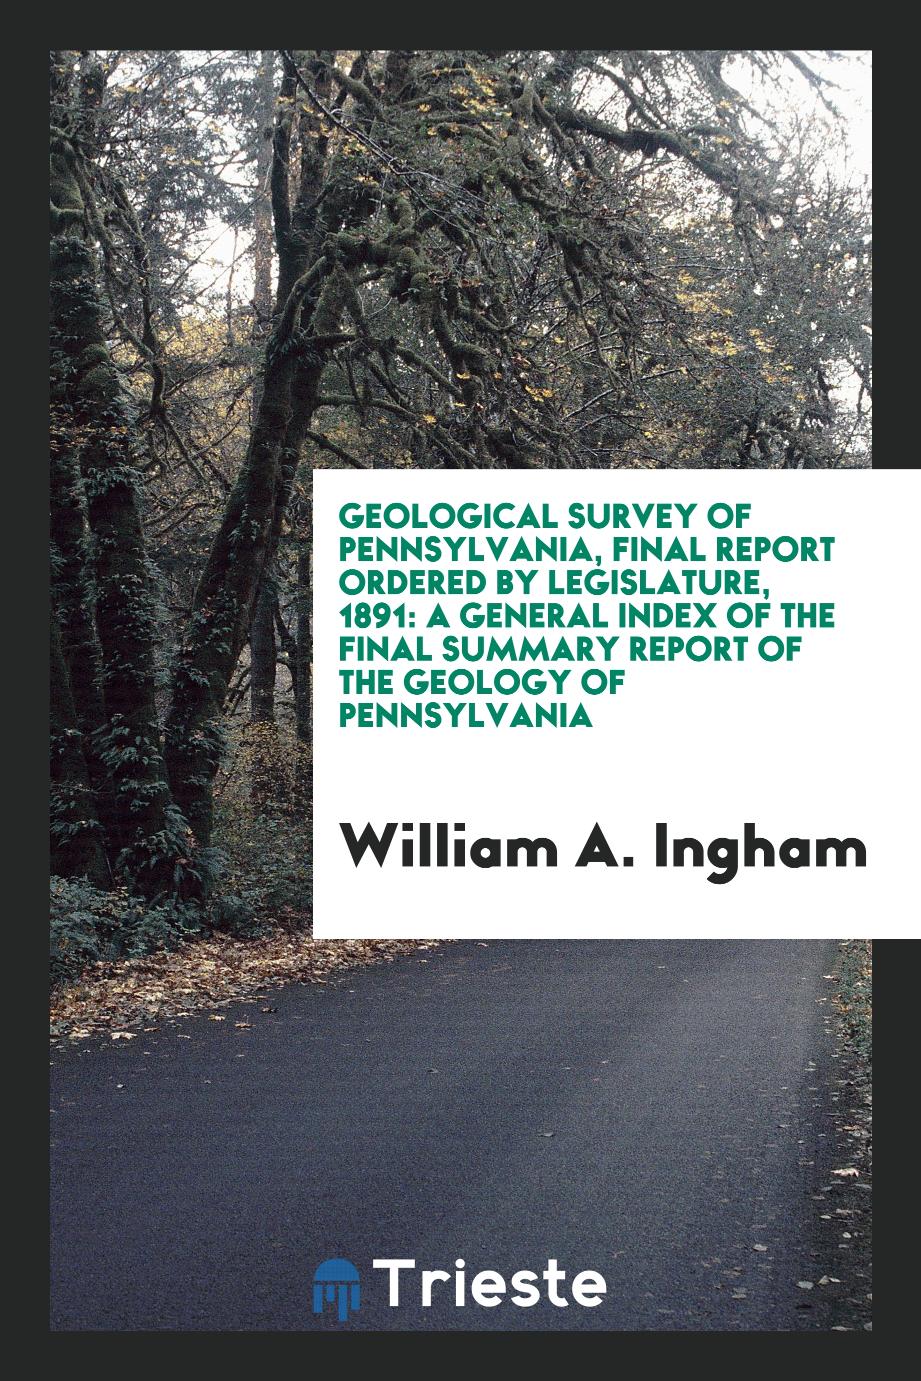 Geological Survey of Pennsylvania, Final Report Ordered by Legislature, 1891: A General Index of the Final Summary Report of the Geology of Pennsylvania